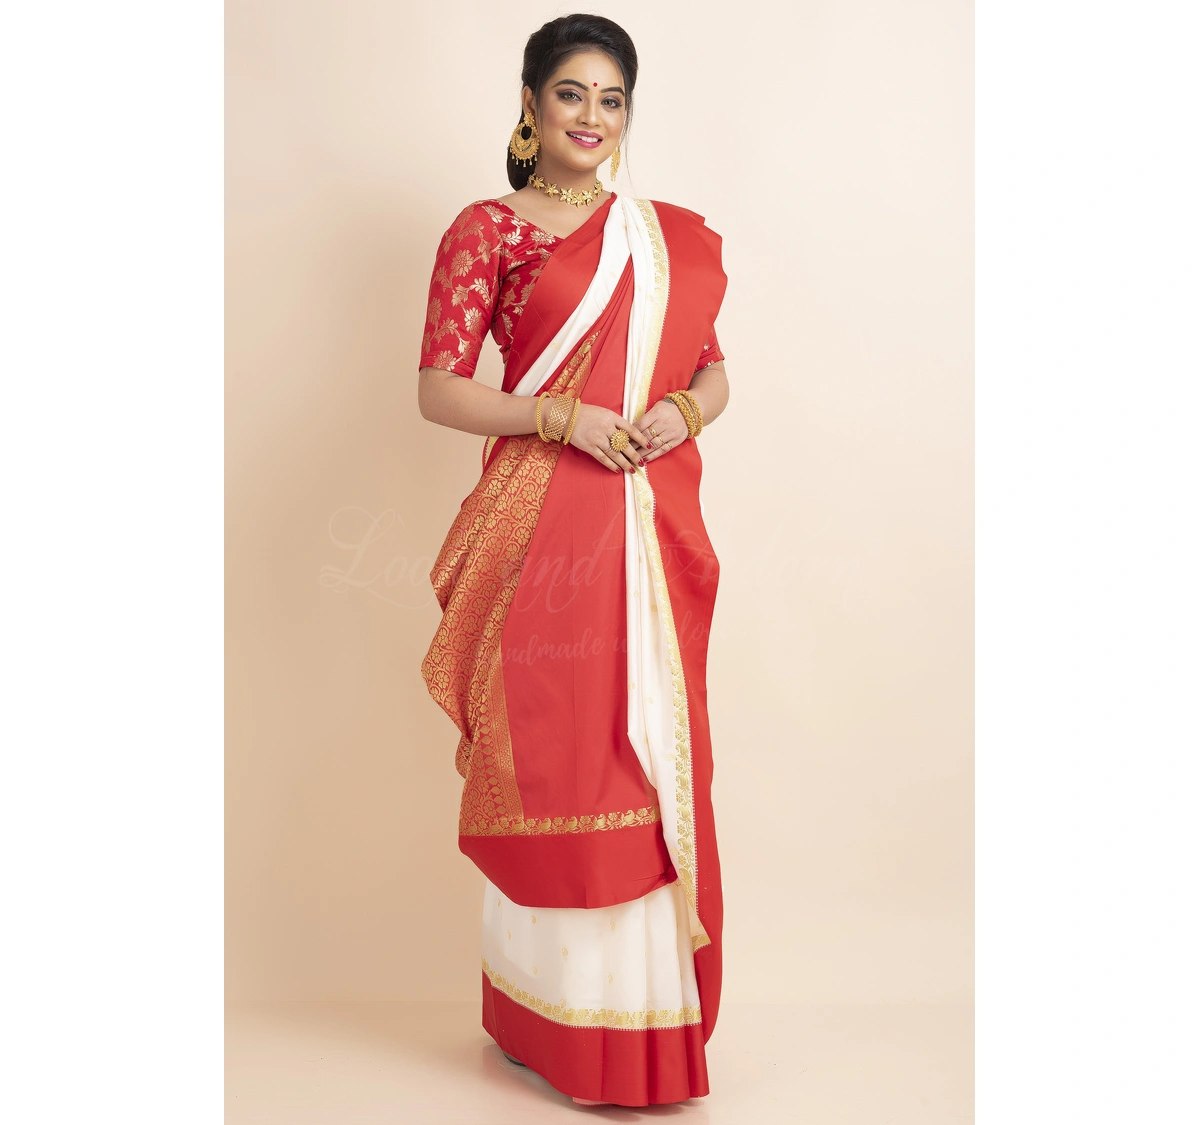 The Significance of Red and White Sarees in Bengali Culture